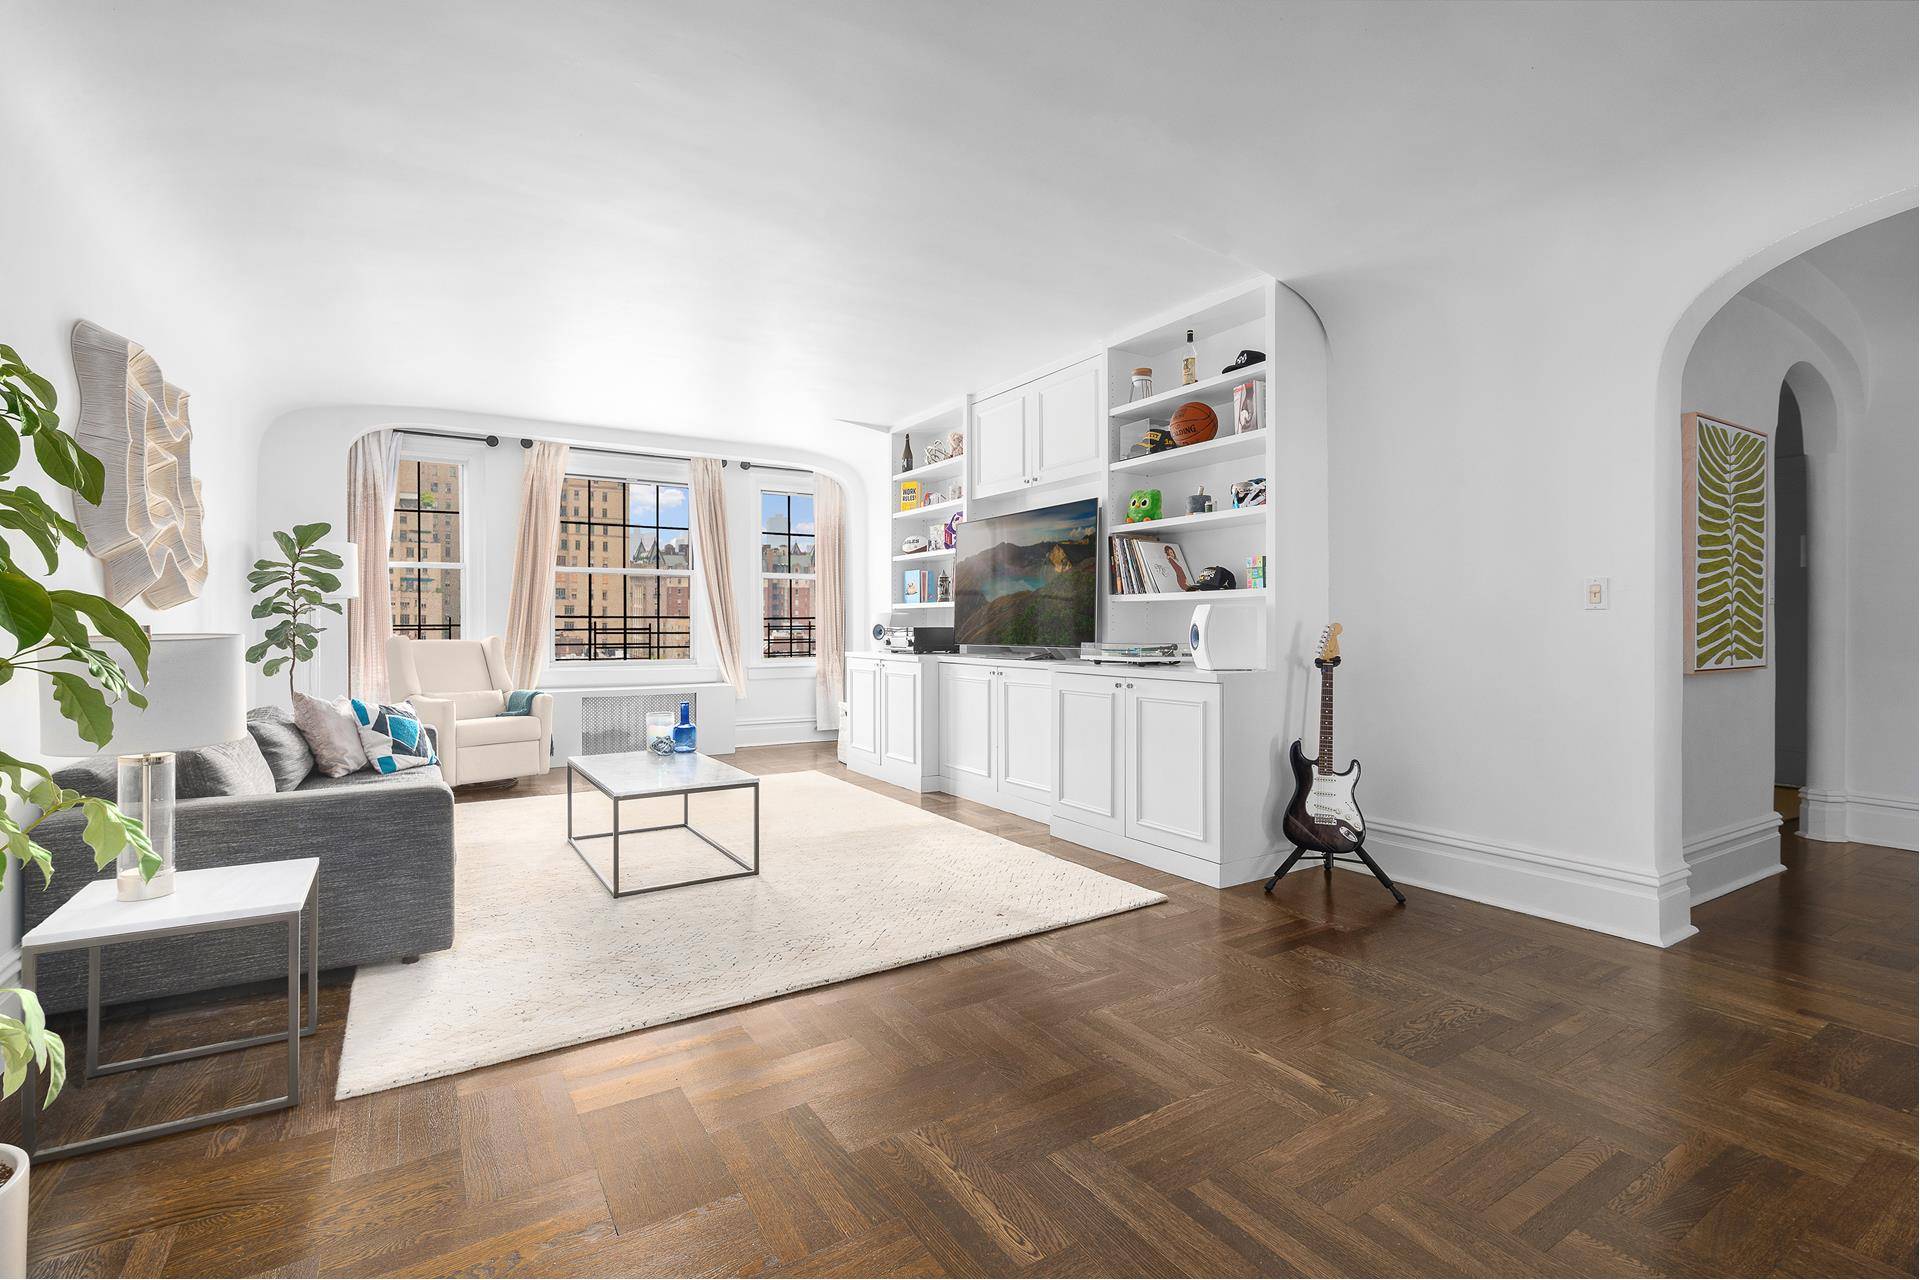 Enter into the timeless allure of this exquisite Rosario Candela Classic Six apartment, located on the prime Upper West Side.